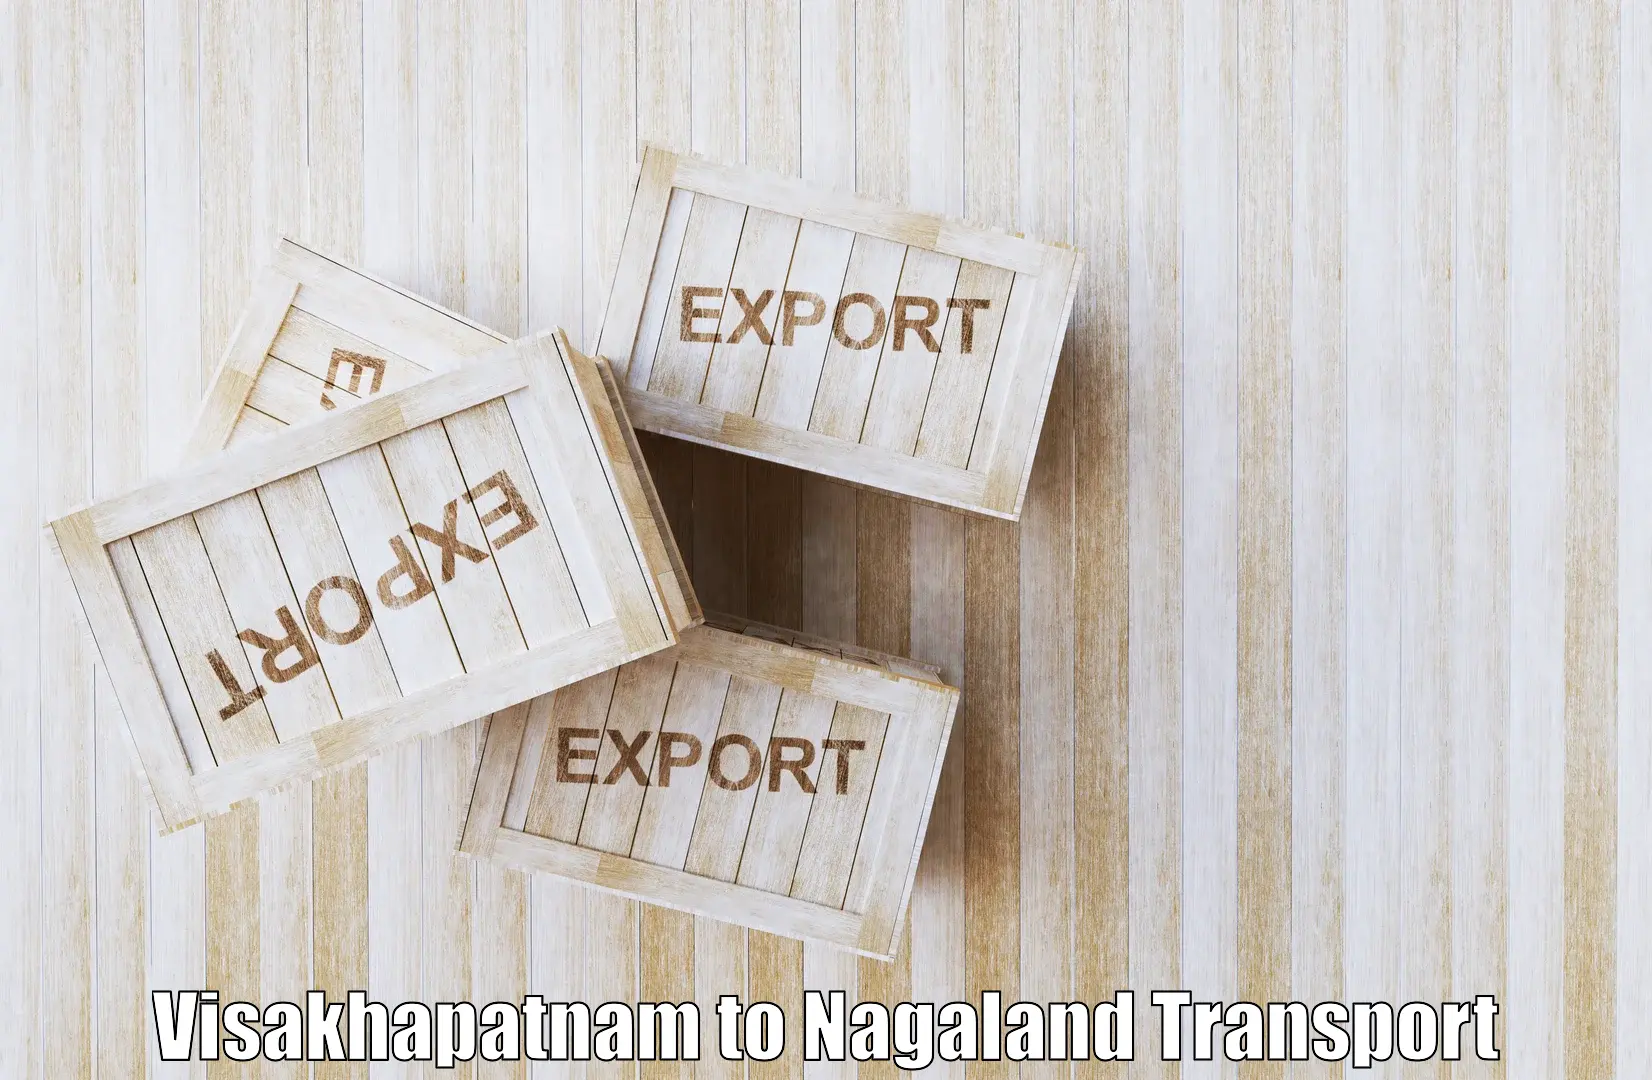 Transport in sharing in Visakhapatnam to Nagaland